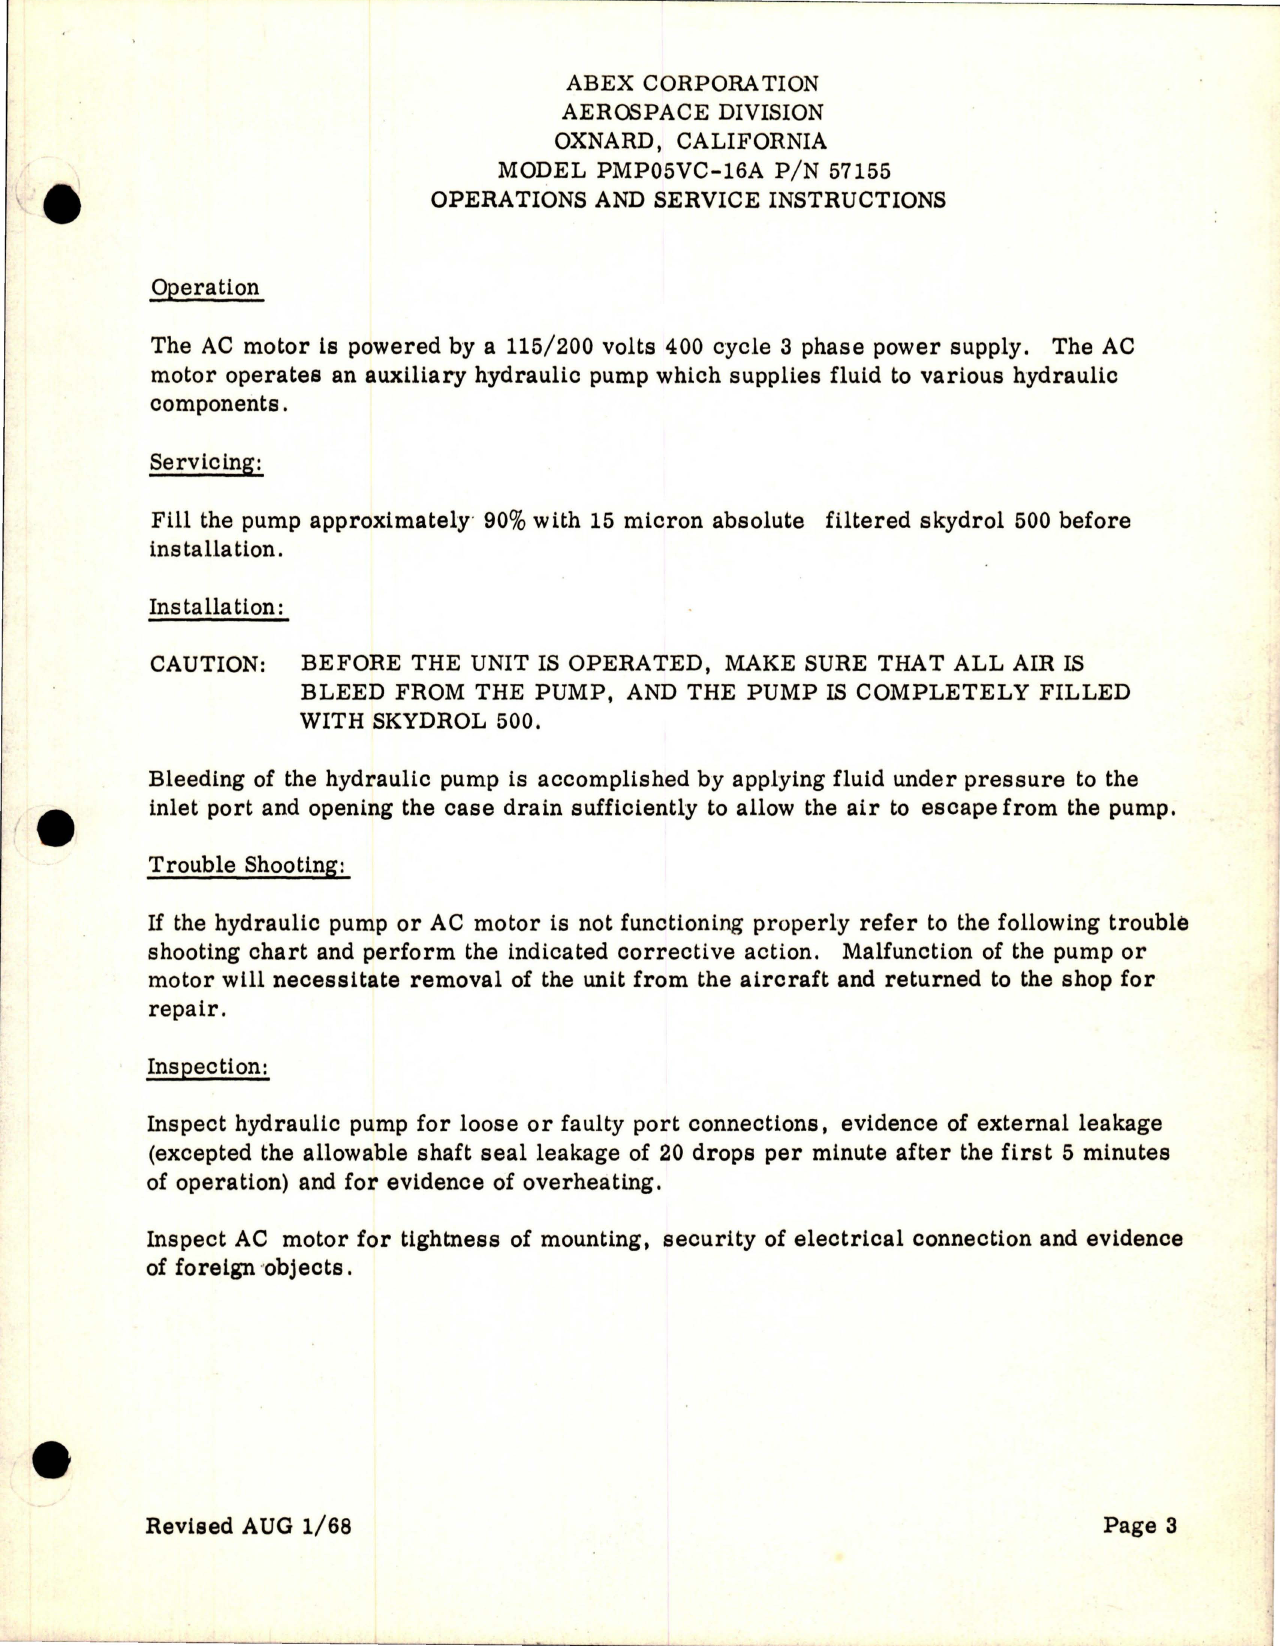 Sample page 5 from AirCorps Library document: Operation and Service Instructions for Pump Motor Package - Part 57155 - Model PMP05VC-16A 